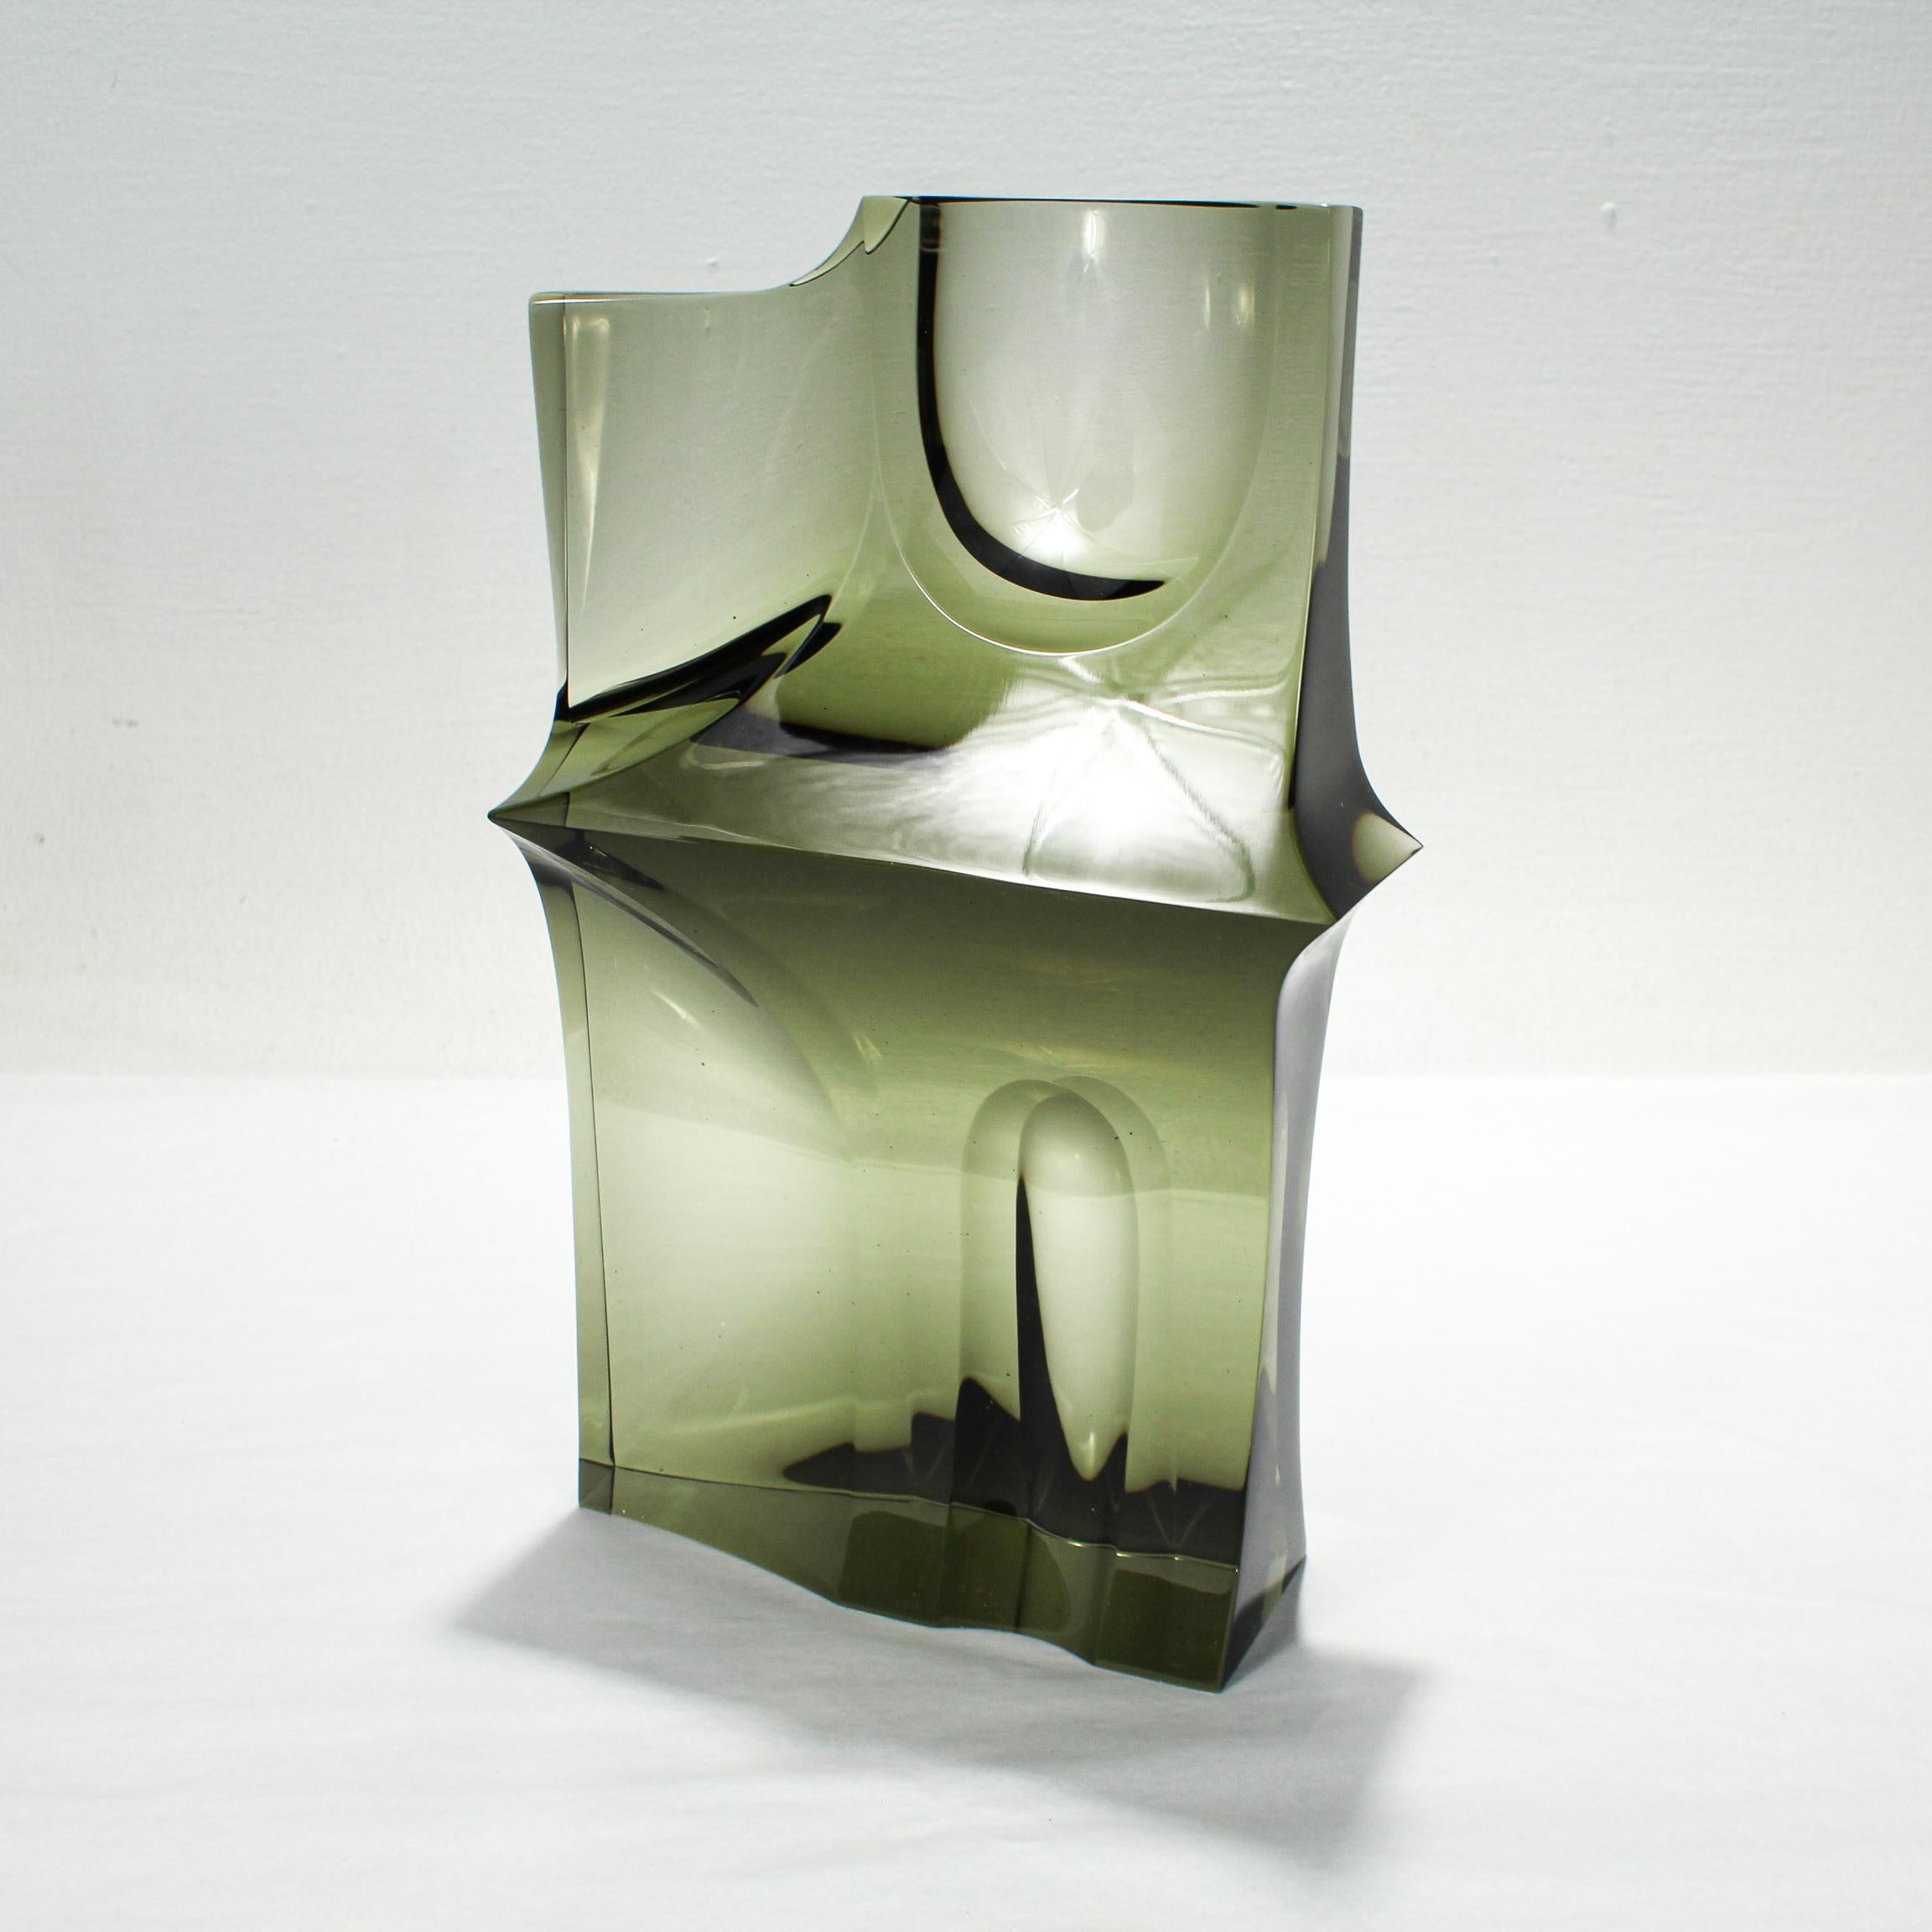 Offered here for your consideration is a fine art glass sculpture.

By Bretislav Novak Jr. 

Novak Jr. is a highly regarded Czech glass artist whose pieces are held in important public & private collections worldwide. 

Signed with an etched